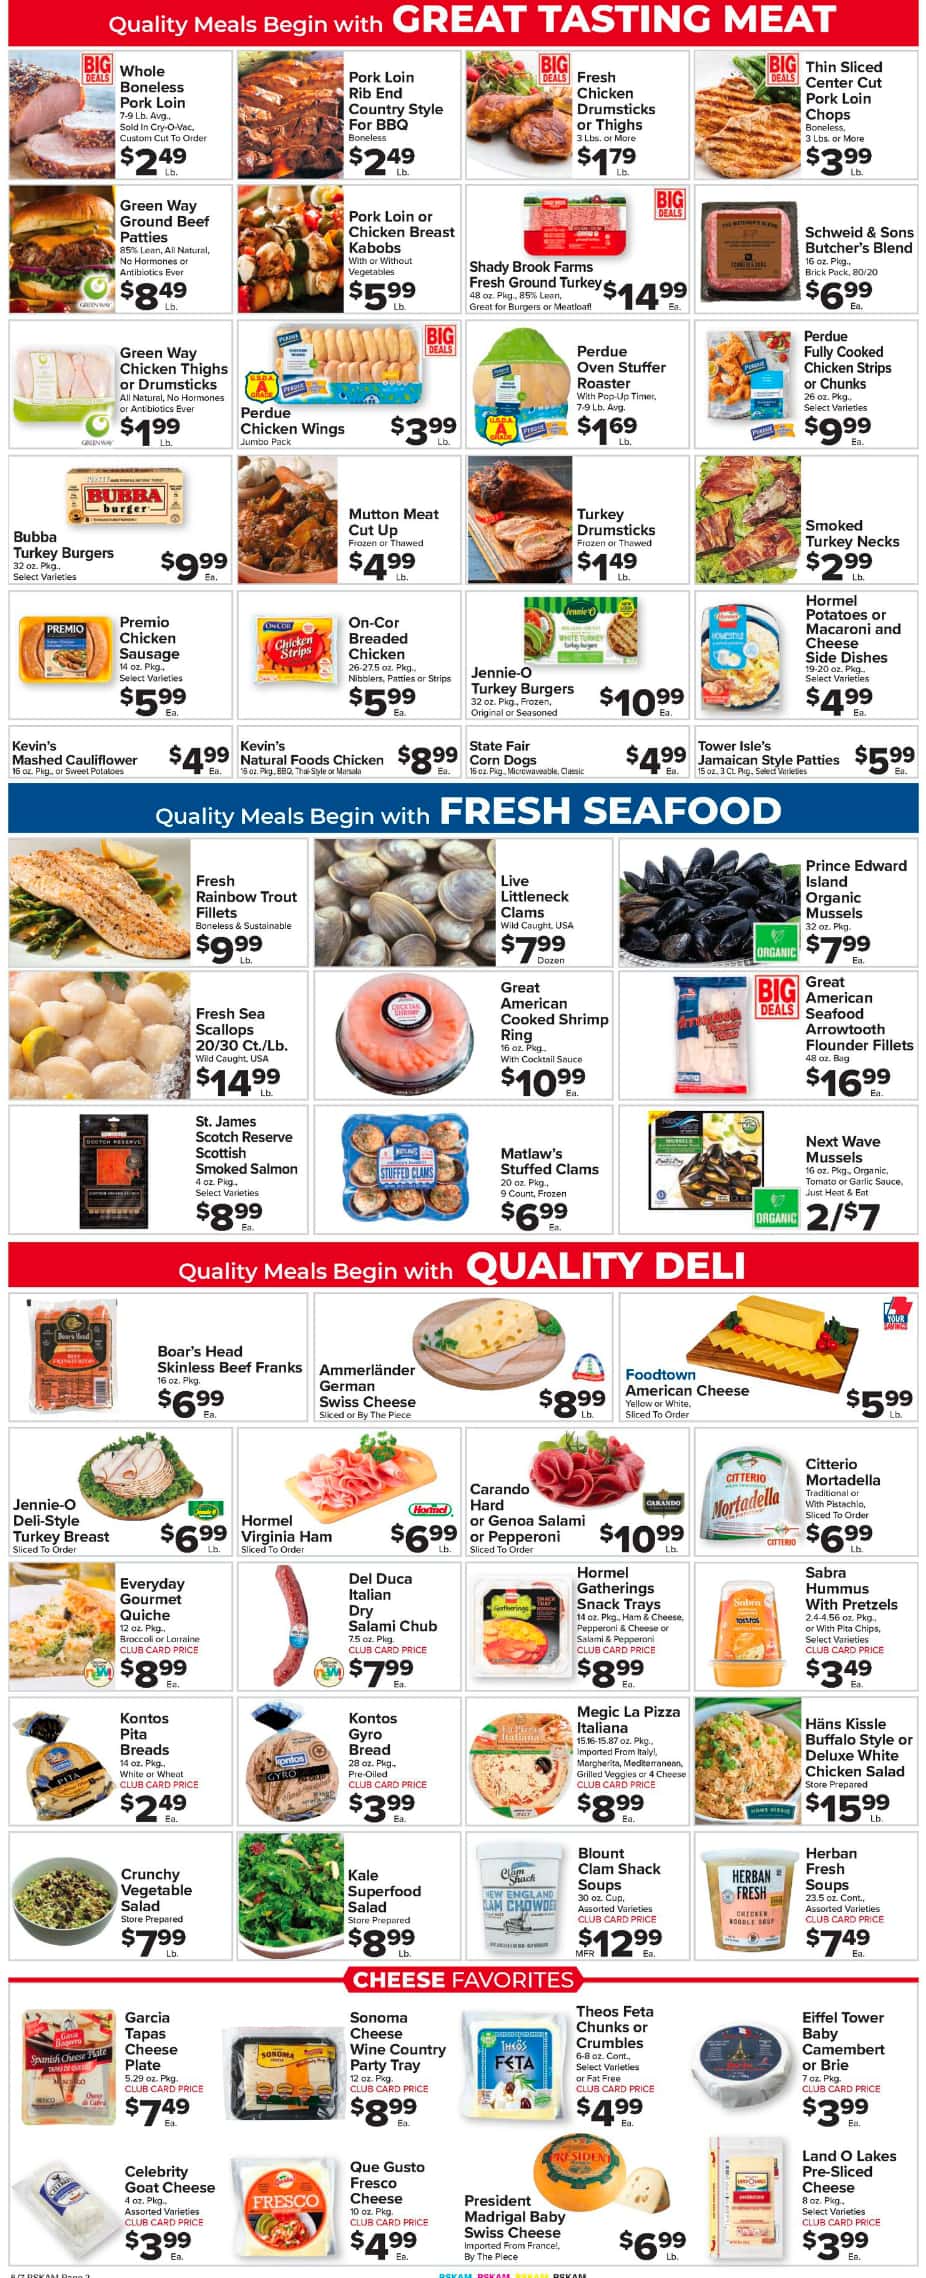 Foodtown July 2024 Weekly Sales, Deals, Discounts and Digital Coupons.